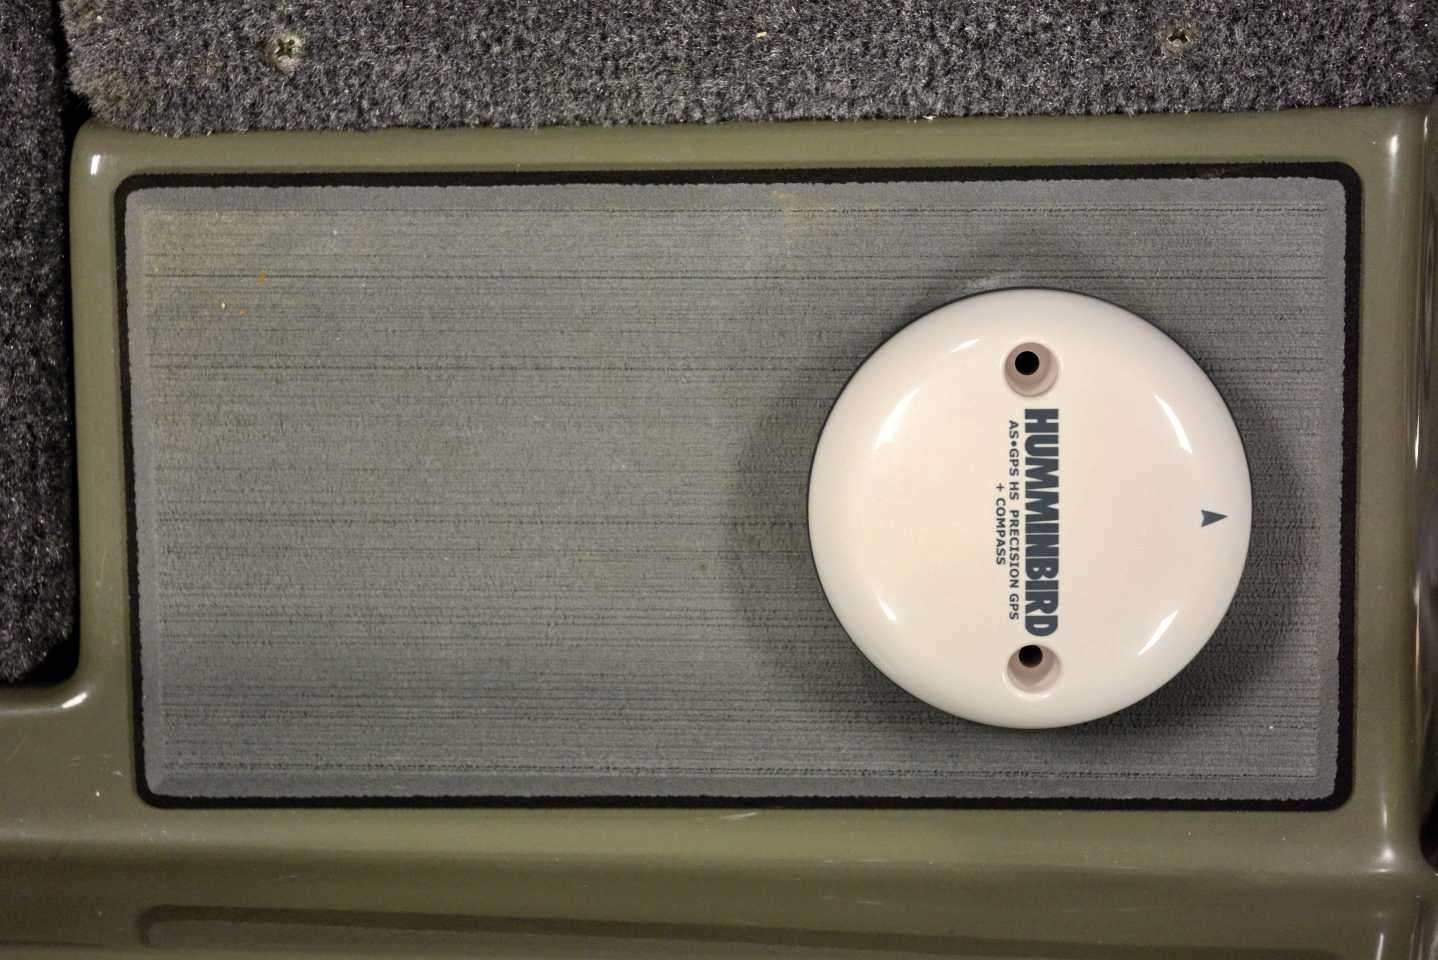 This is the Humminbird AS GPS HS External GPS Receiver. It features a built-in compass to provide true heading orientation. The ideal mounting location is nearest the transducer, which will be in the bilge. Trouble is, nearby magnets can make the compass read incorrectly, and those are used in the Minn Kota Raptor units. Falcon engineered this mounting plate directly behind the driver seat for the perfect alternative. 
